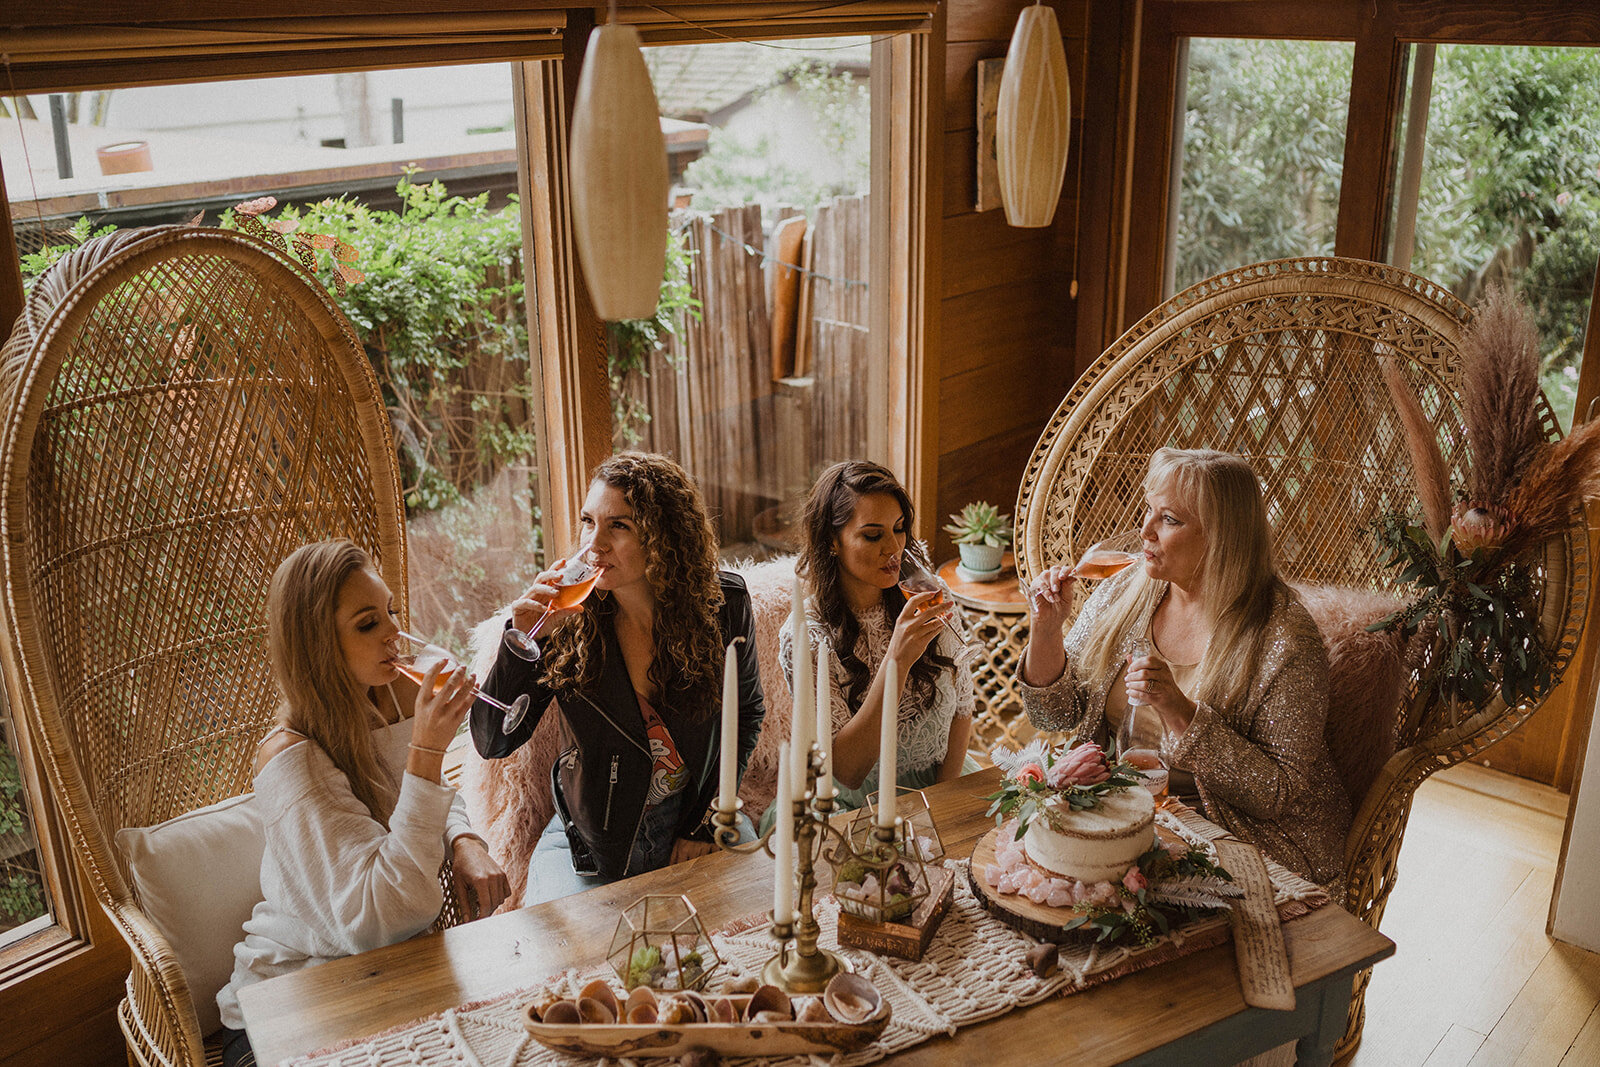 galentine's aprty_toast_champagne_ boho decor_peacock chairs_succulents_event rentals_kiss me in carmel vintage rentals_ boho bachelorette party.jpg